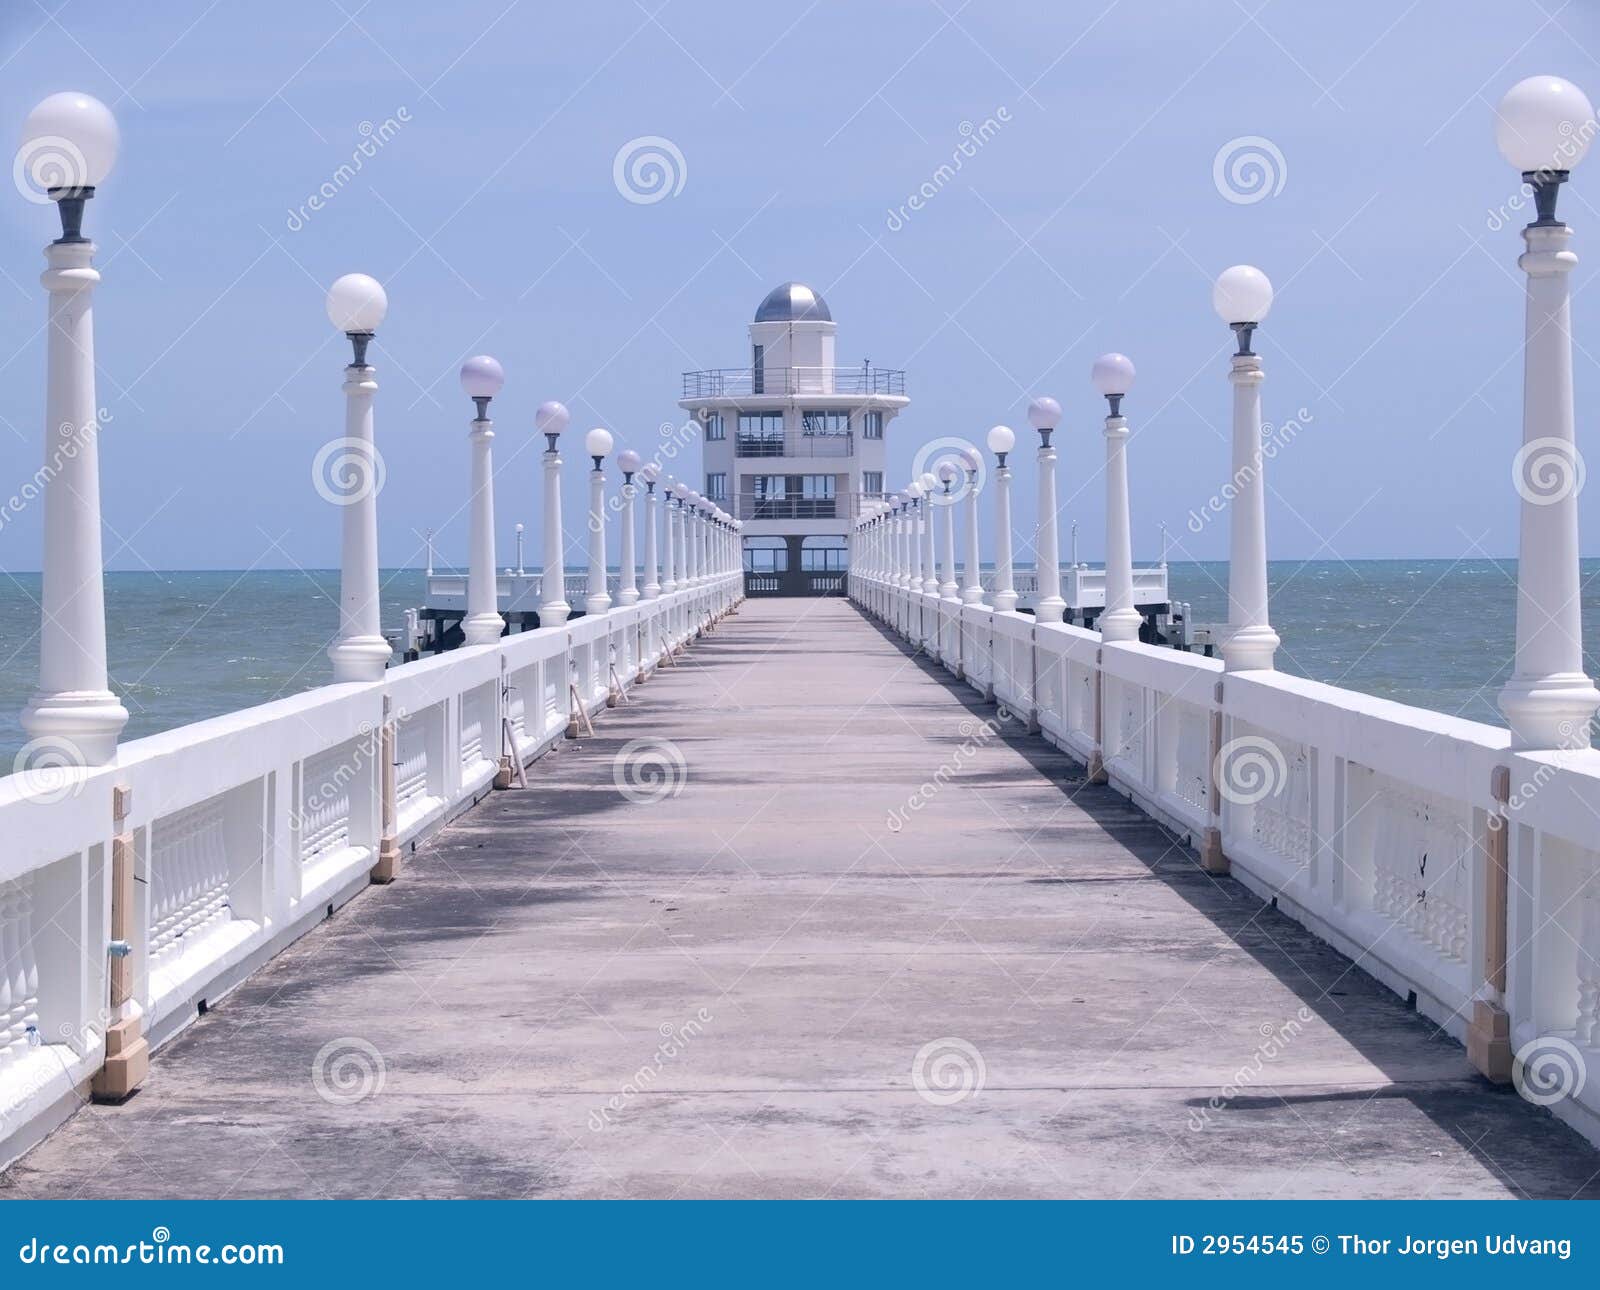 pier with observation tower